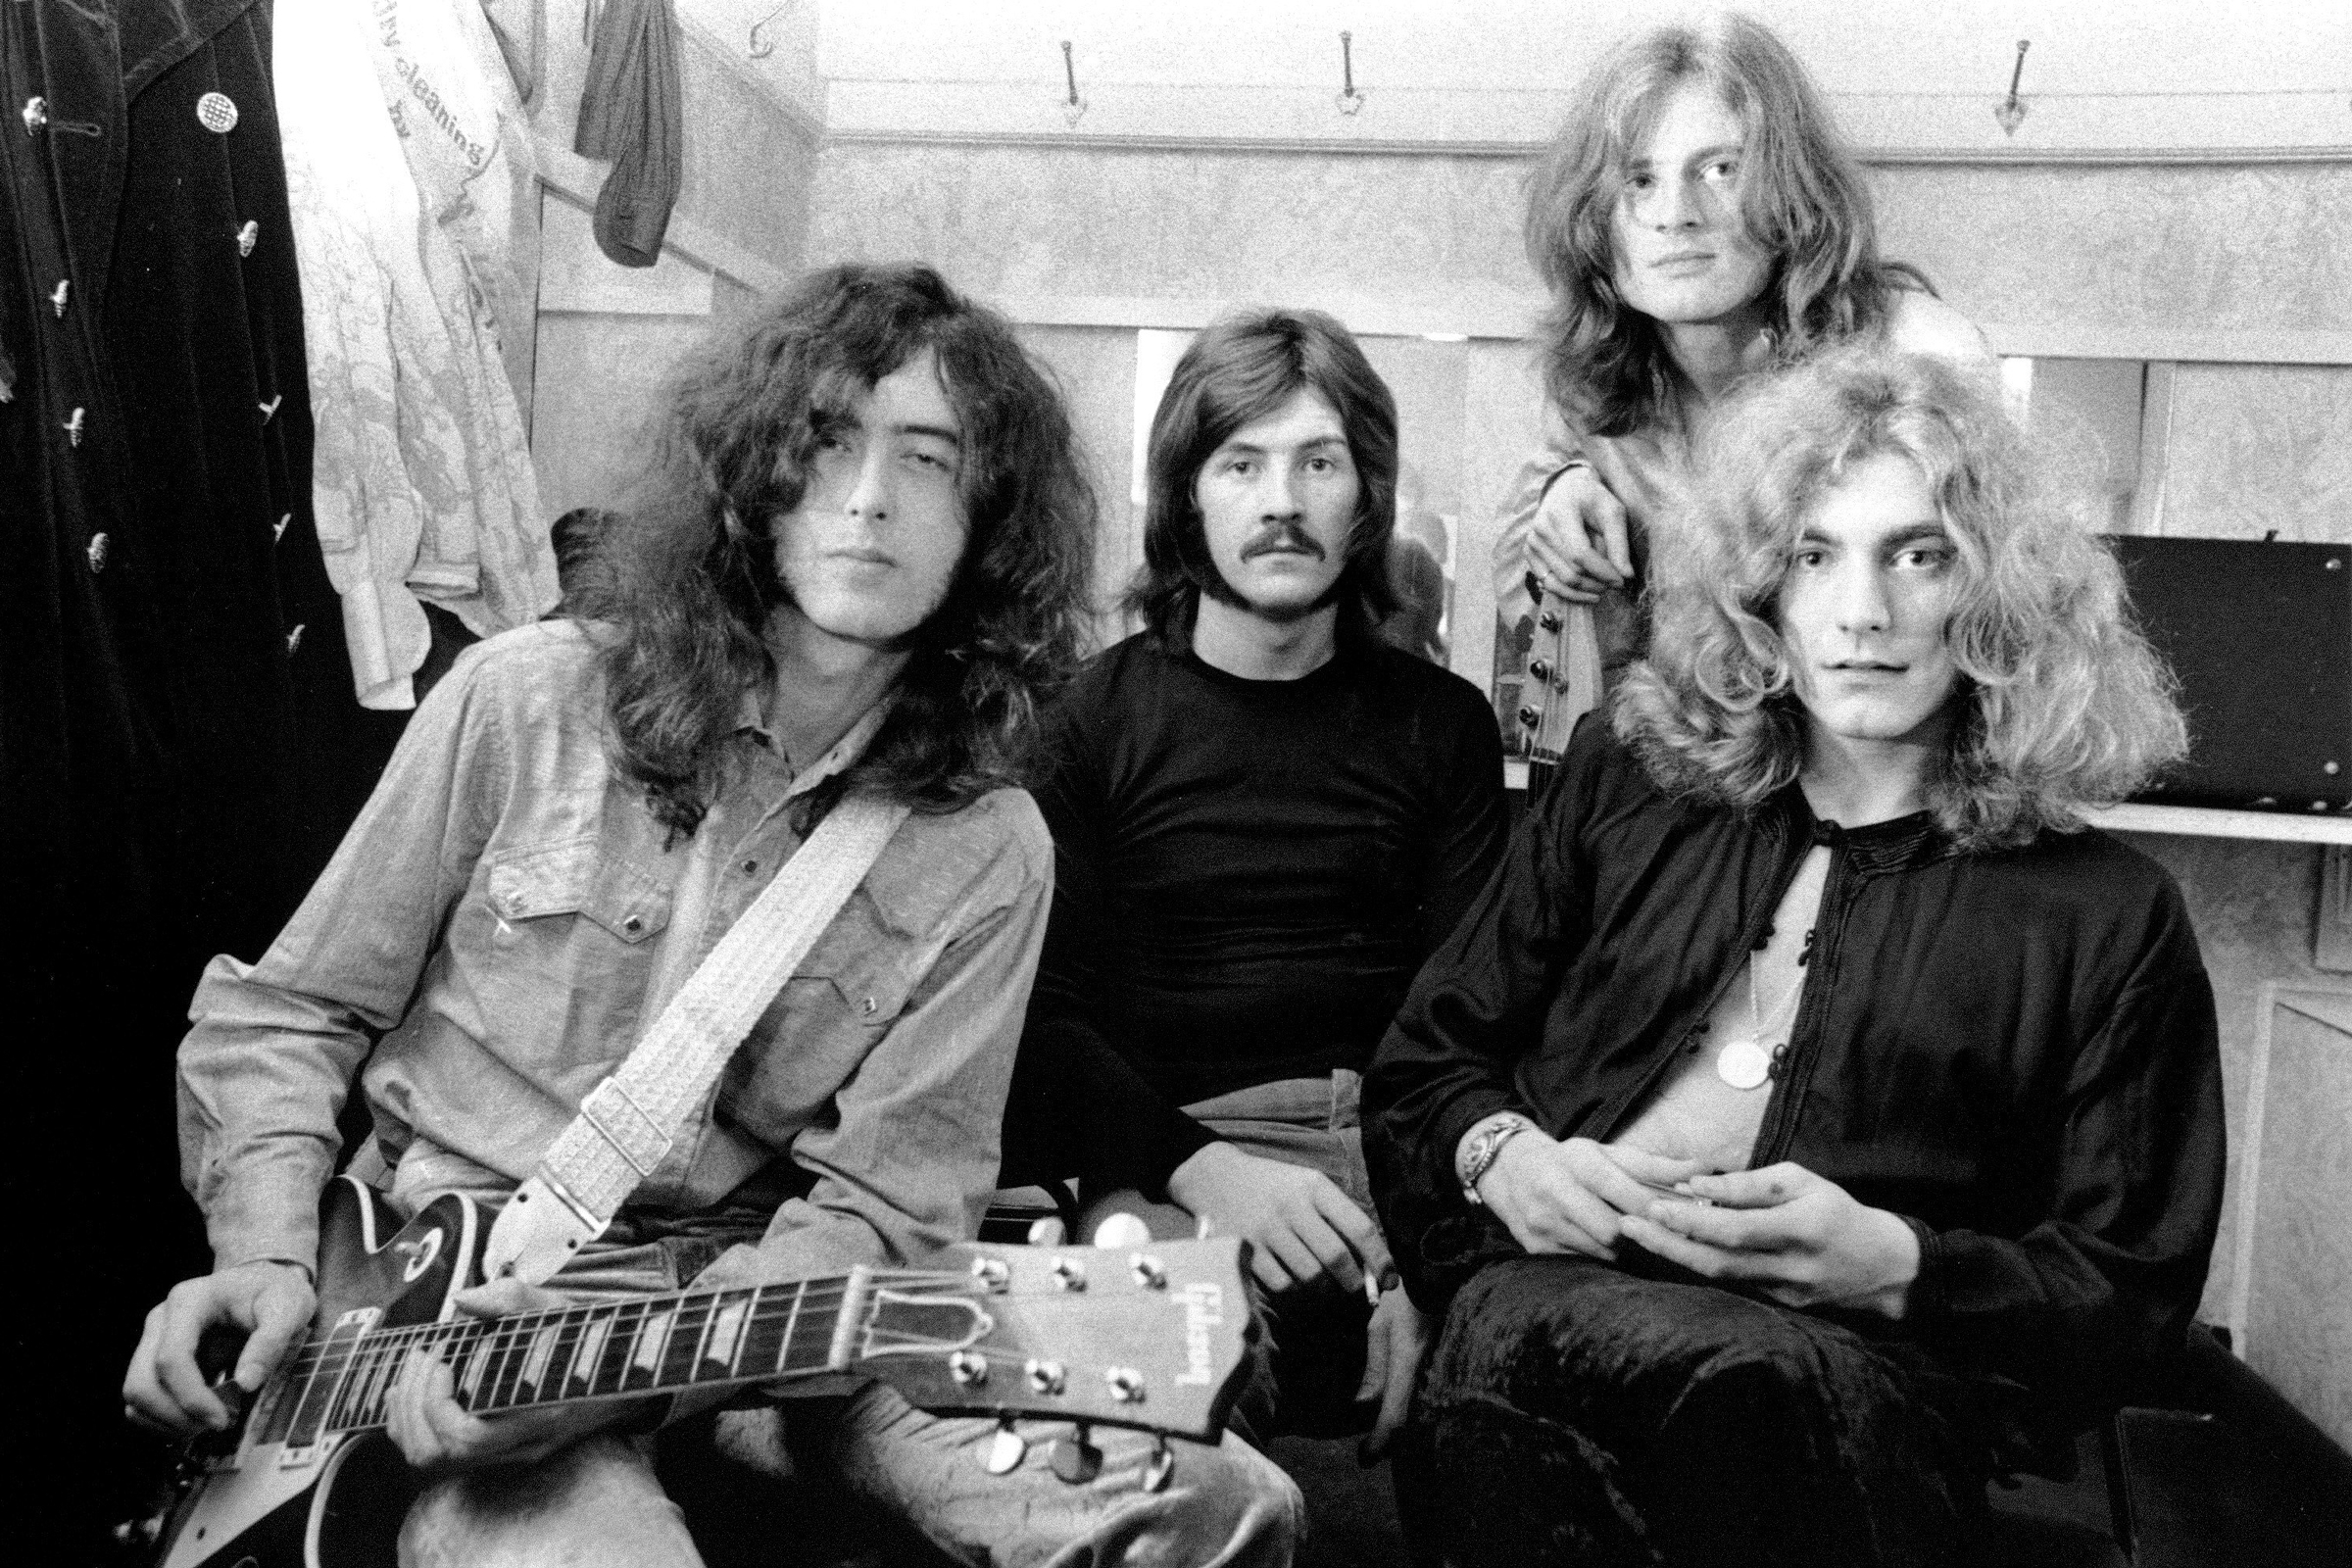 Led Zeppelins ‘Whole Lotta Love’ voted greatest guitar riff of all time